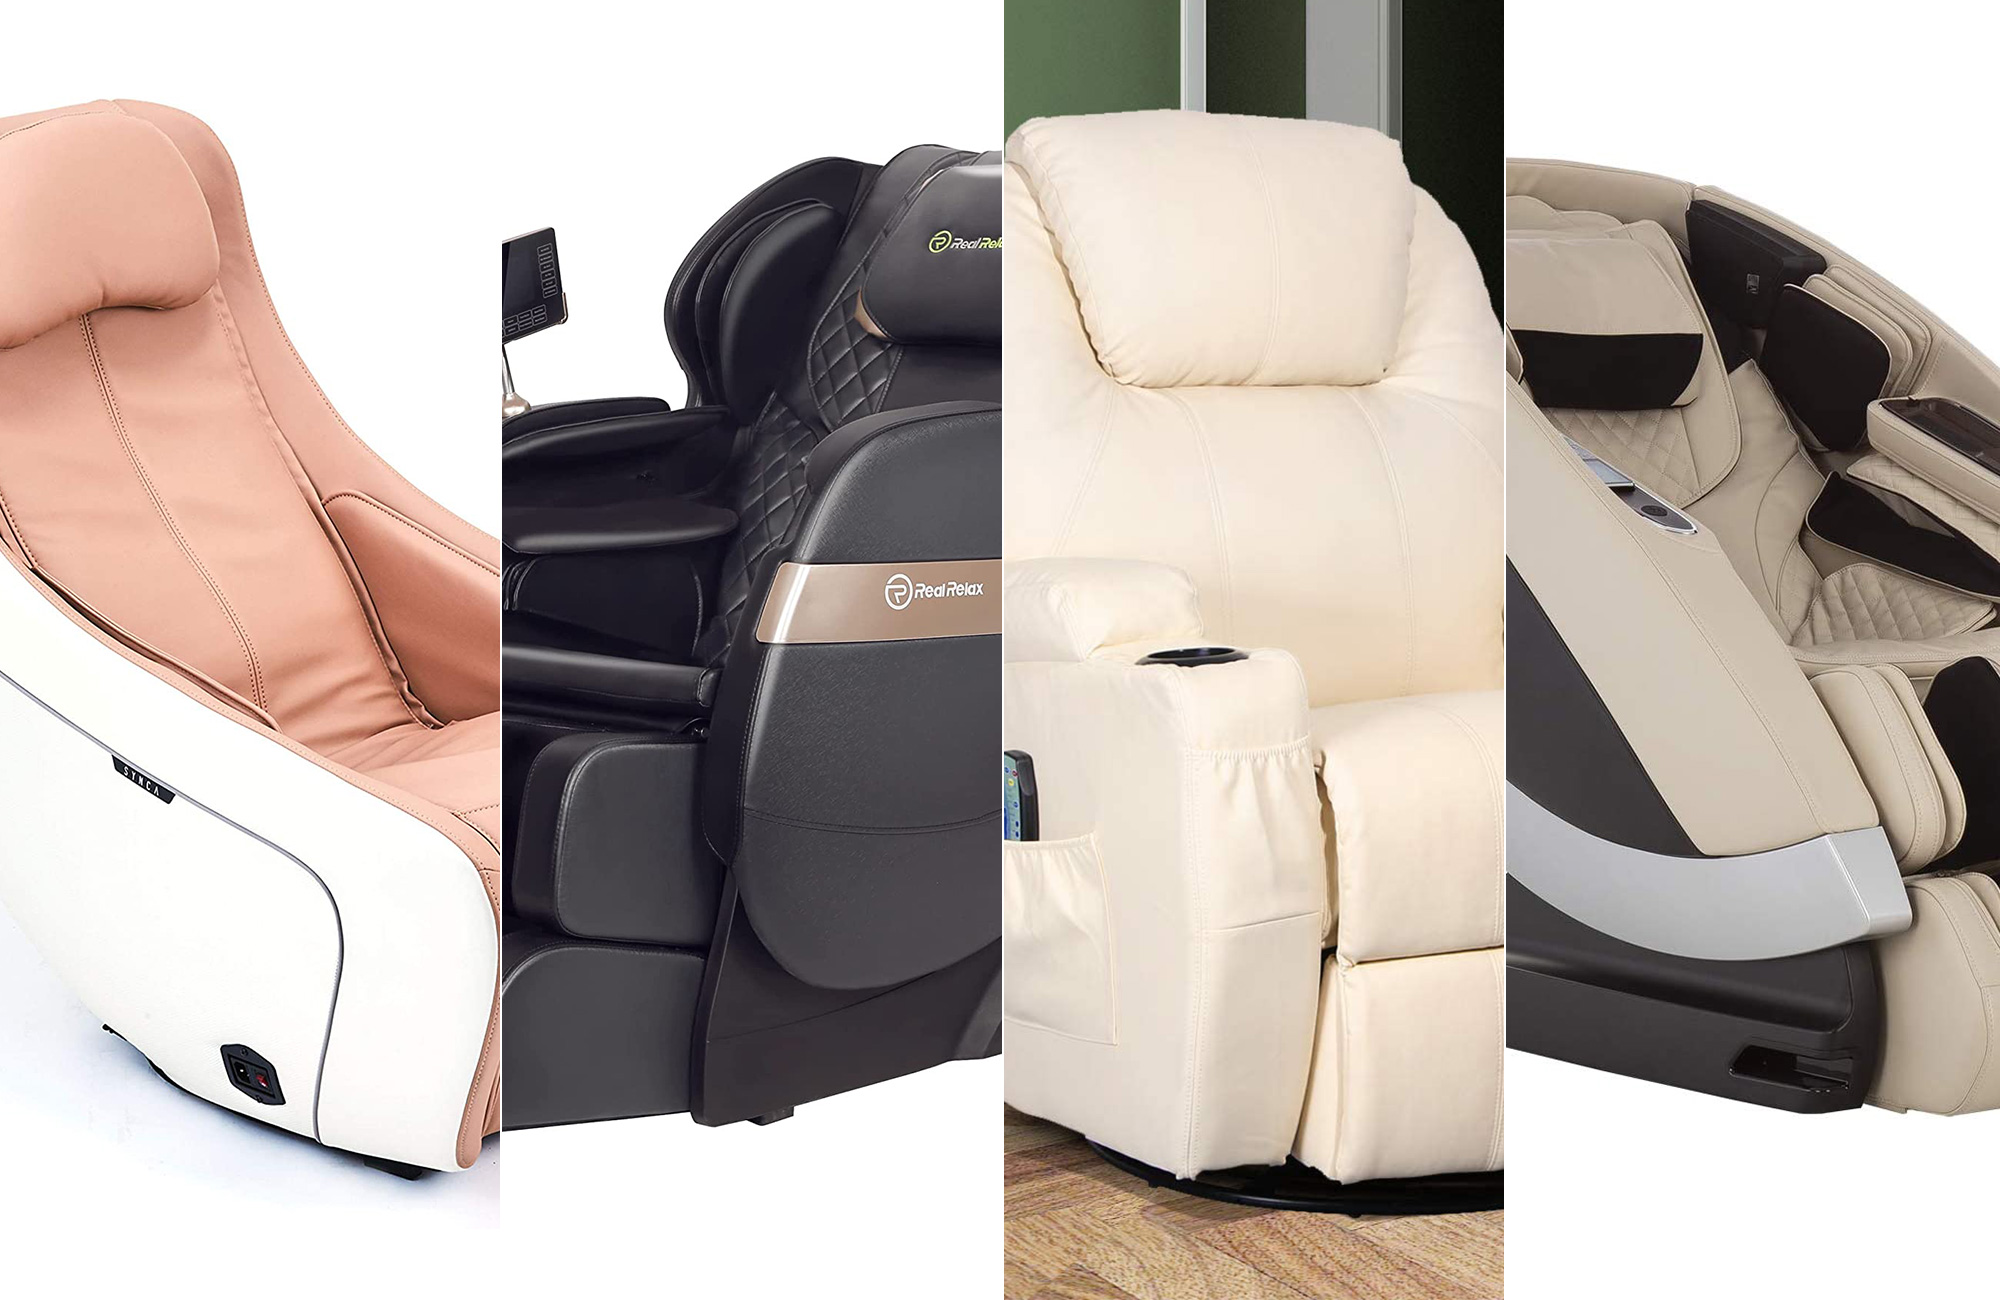 The Best Massage Chairs and Recliners to Buy 2023